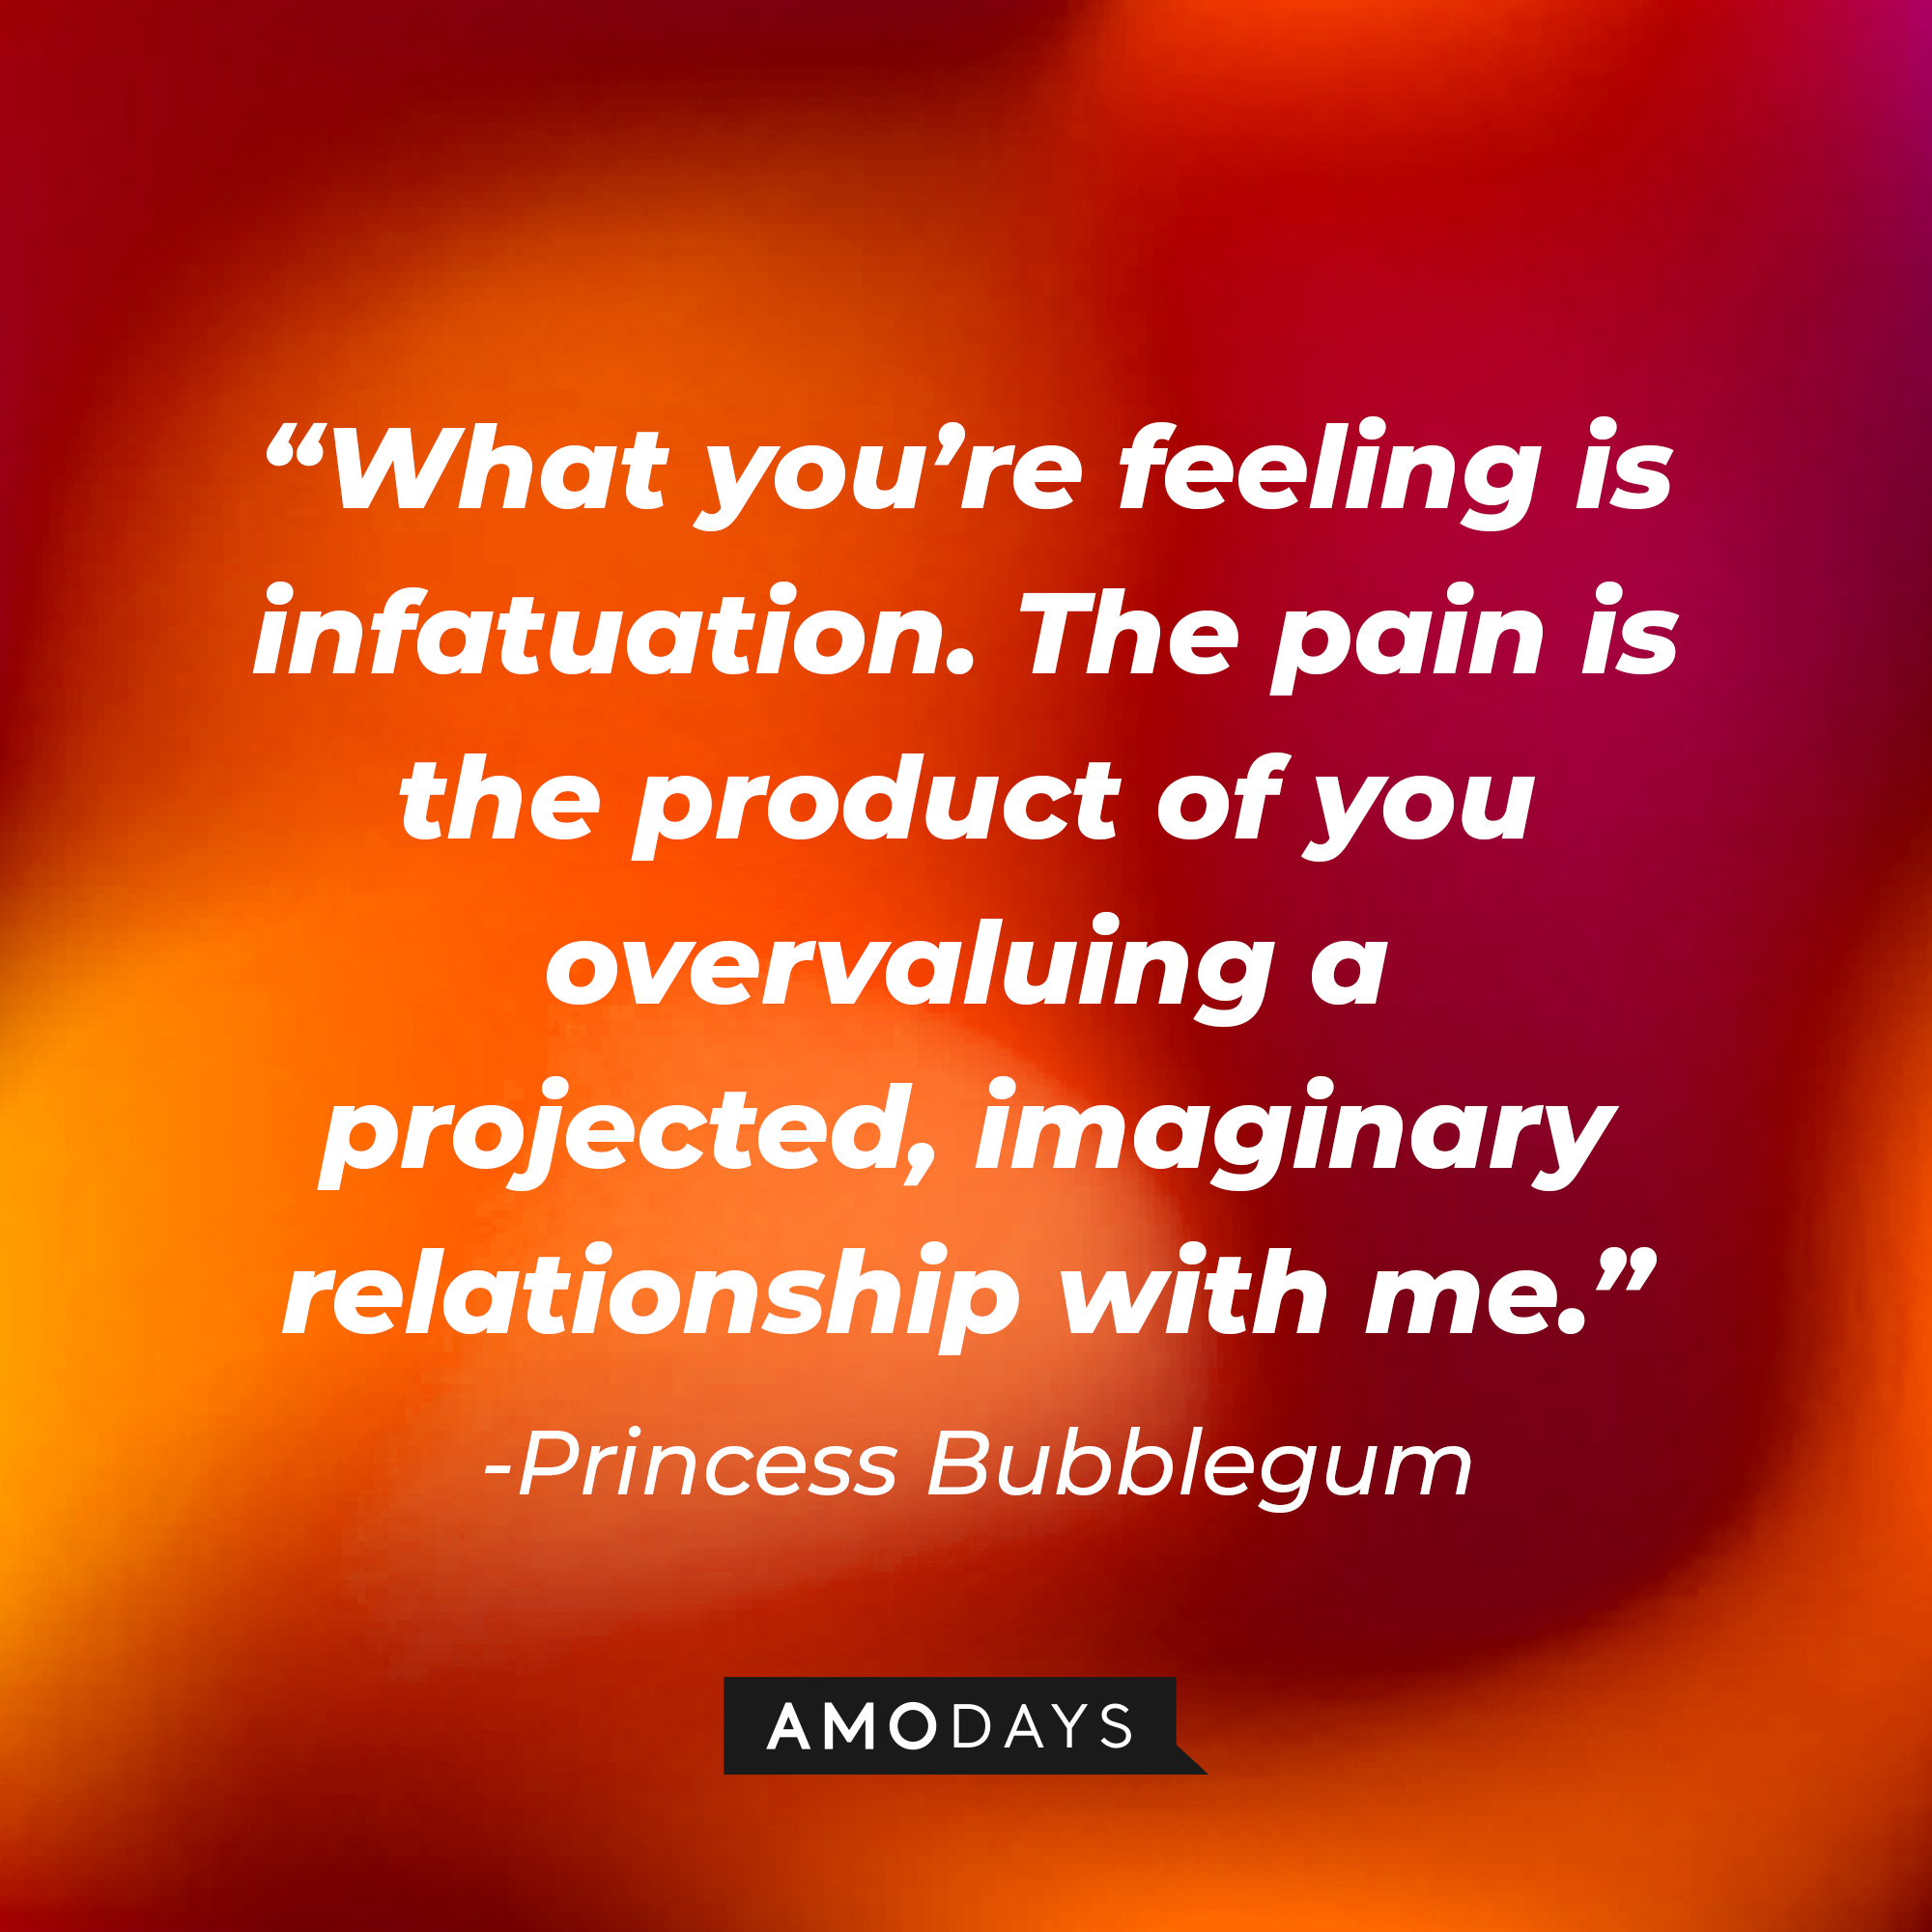 Princess Bubblegum’s quote: “What you’re feeling is infatuation. The pain is the product of you overvaluing a projected, imaginary relationship with me.”  | Source: AmoDays